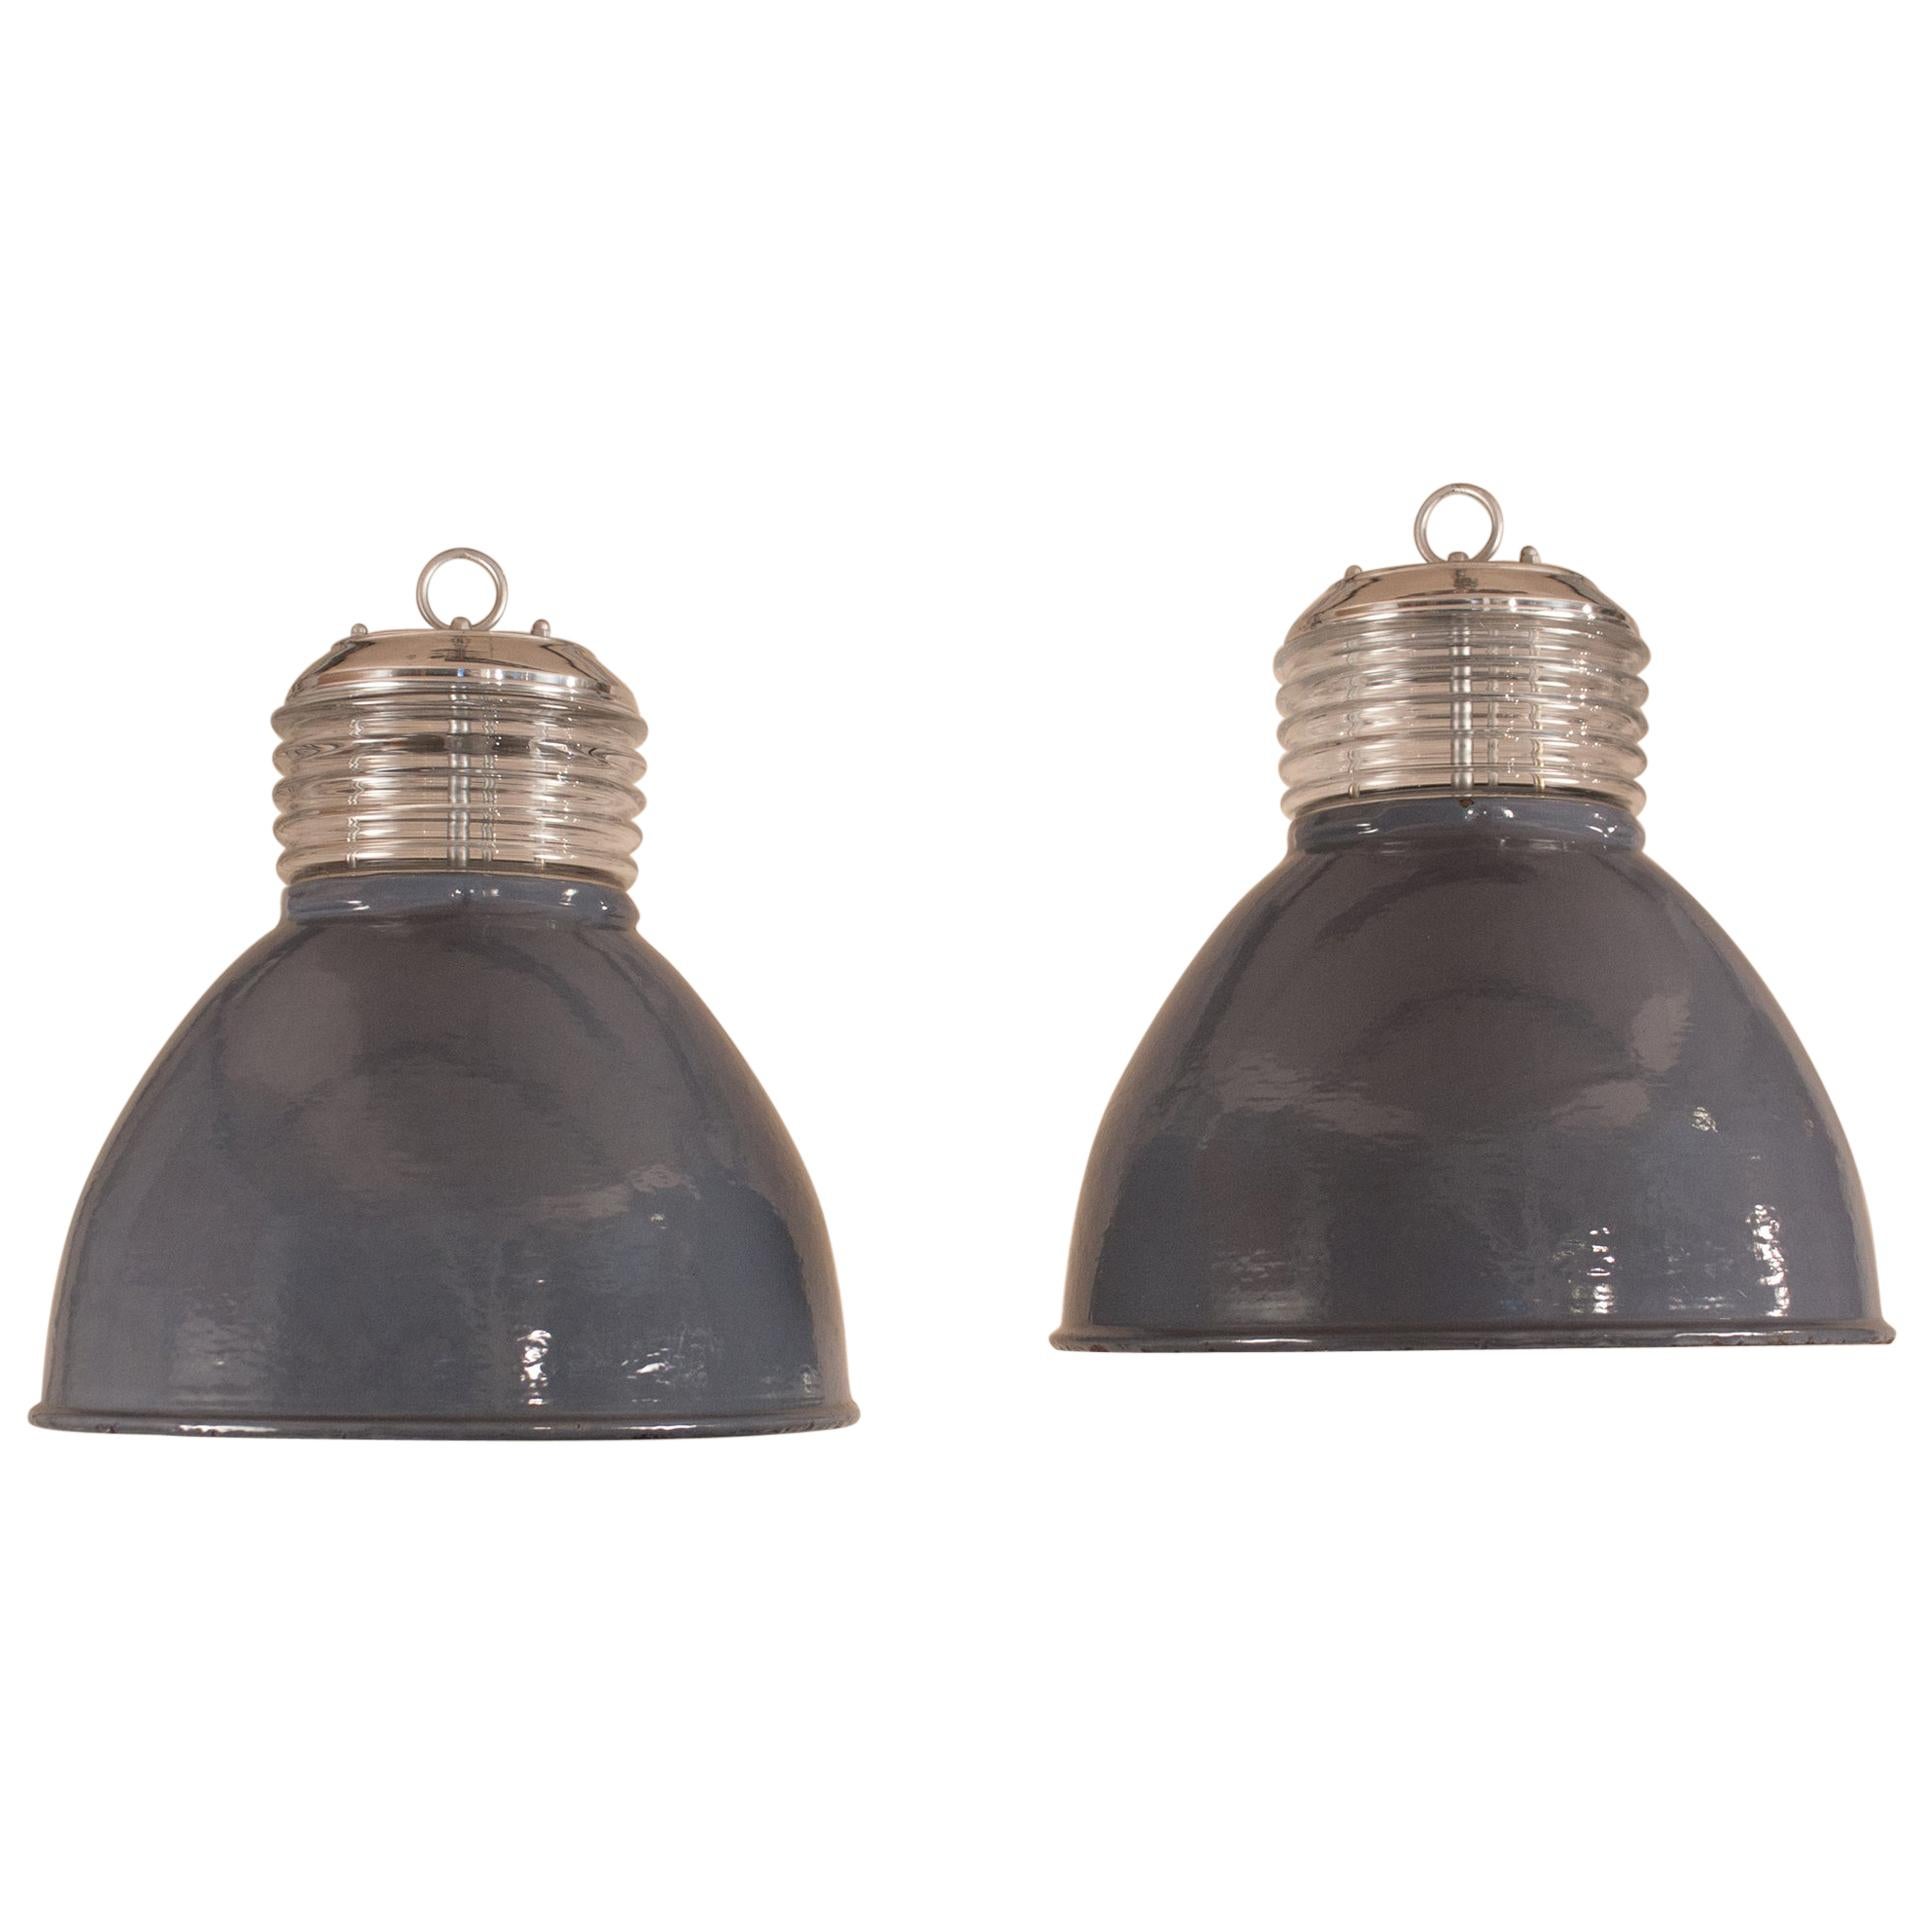 Pair of Vintage Gray Enamel and Glass Industrial Pendant Lights